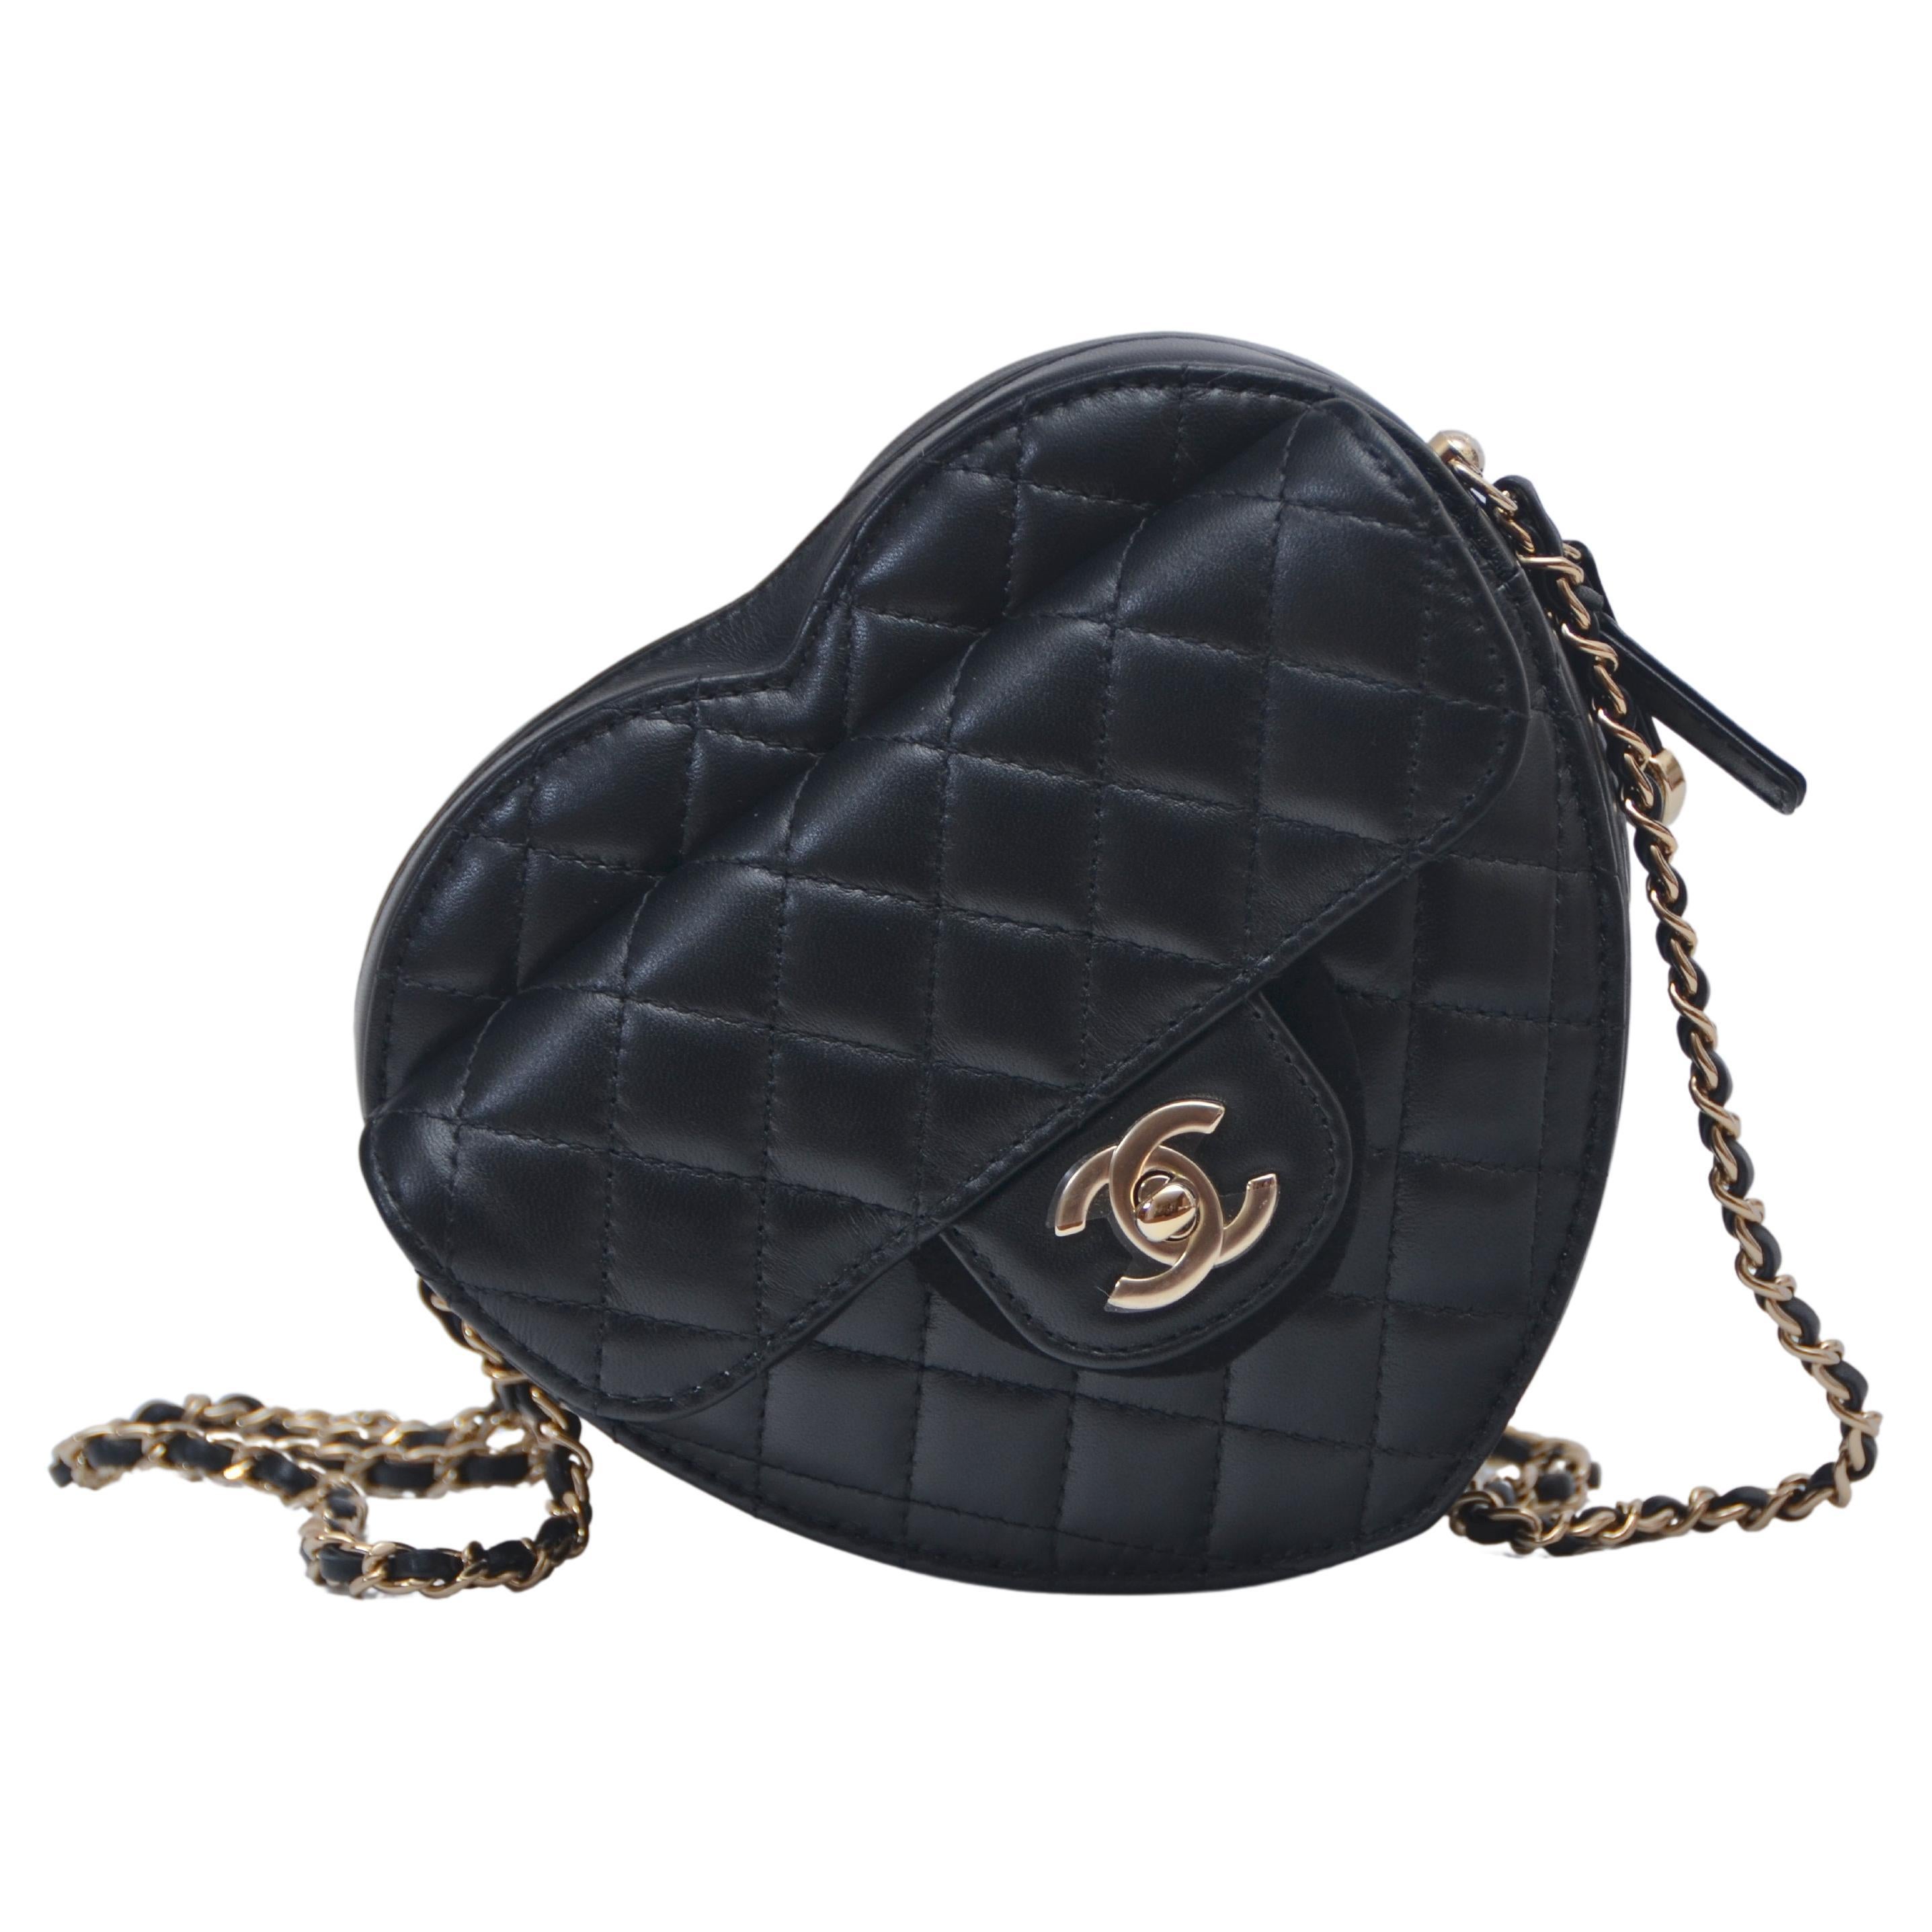 Chanel Heart Clutch on Chain - Mod shot, what fits, paying over